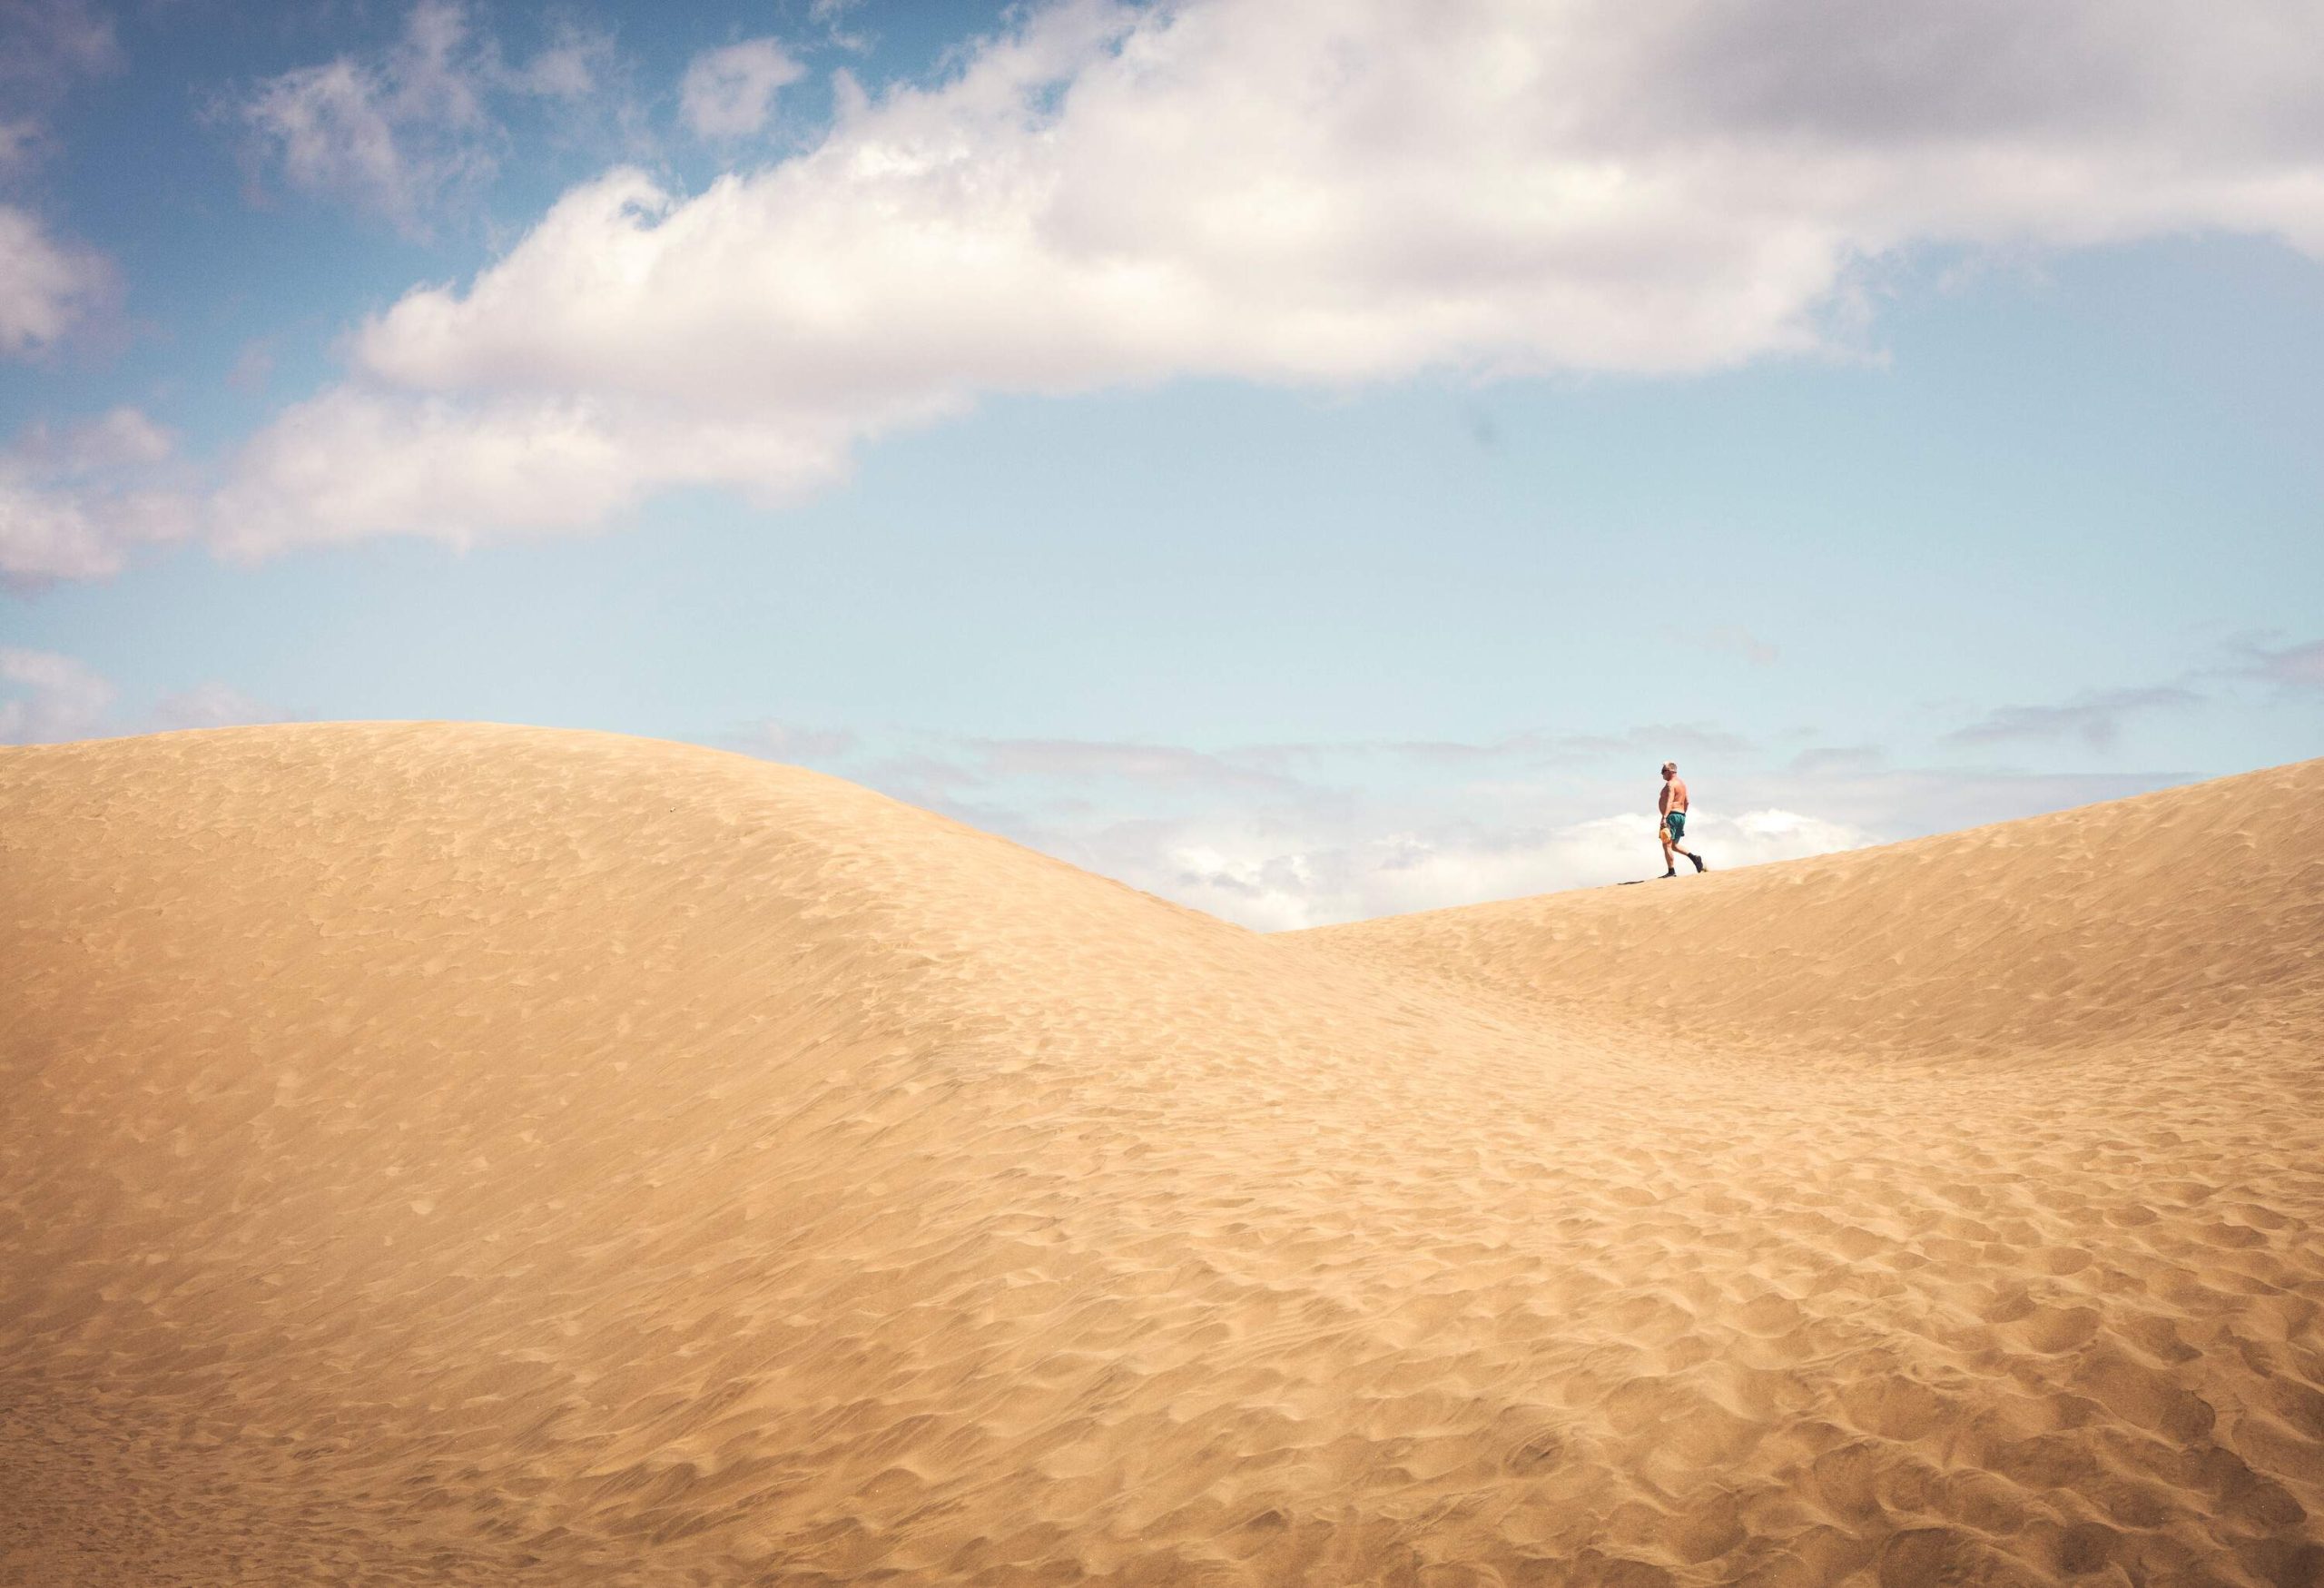 A person walking on deserted sand dunes.